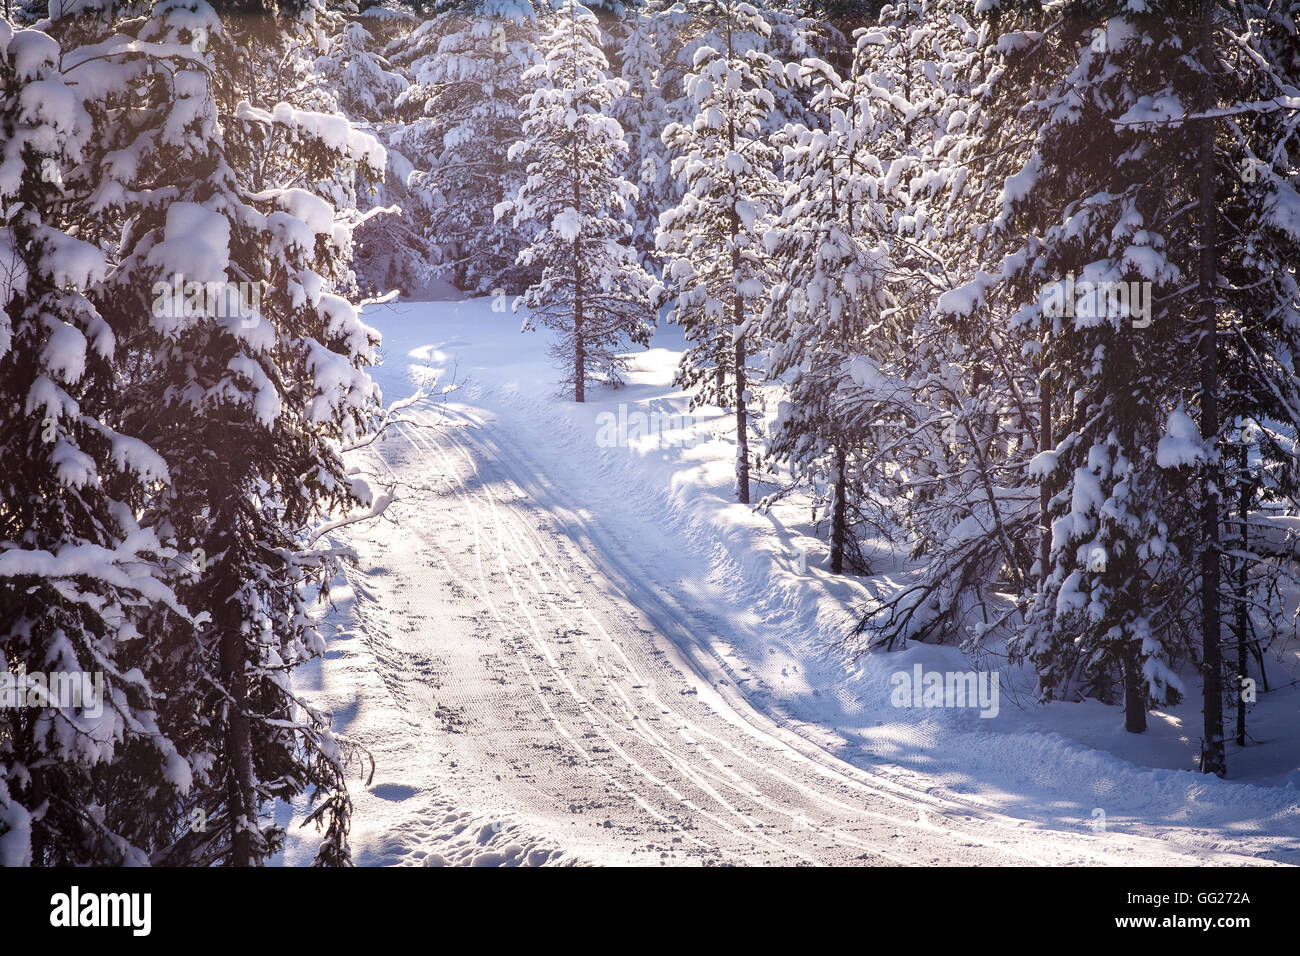 Cross country ski tracks on winter road. Snow-clad trees surrounding. Compressed telephoto view. Stock Photo